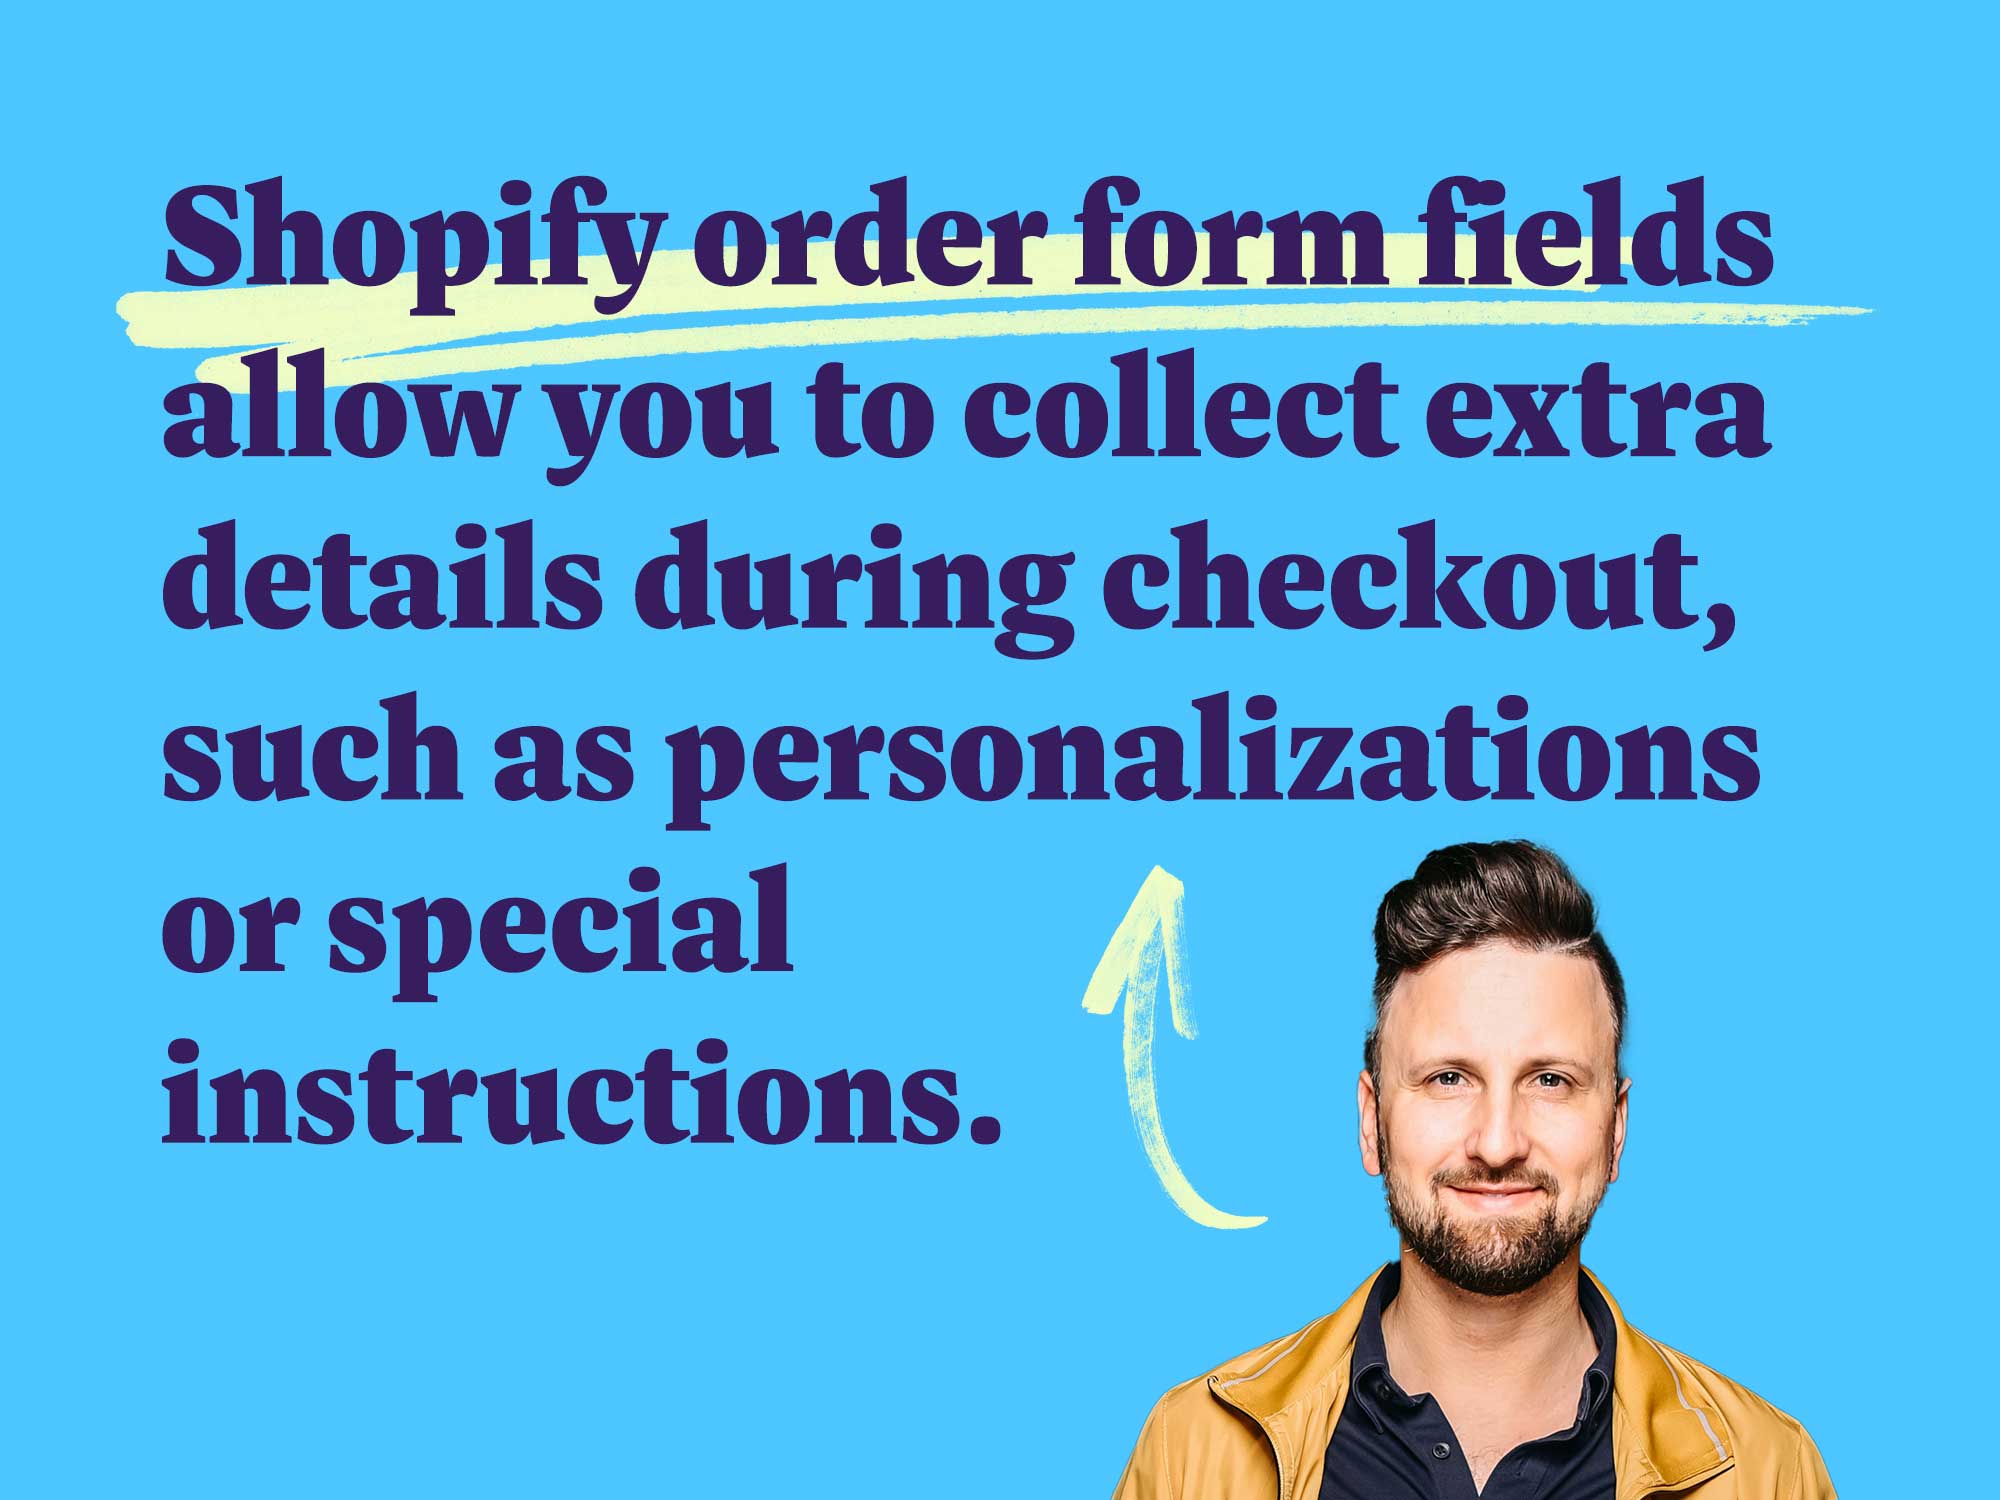 Shopify order form fields allow you to collect extra details during checkout, such as personalizations or special  instructions.